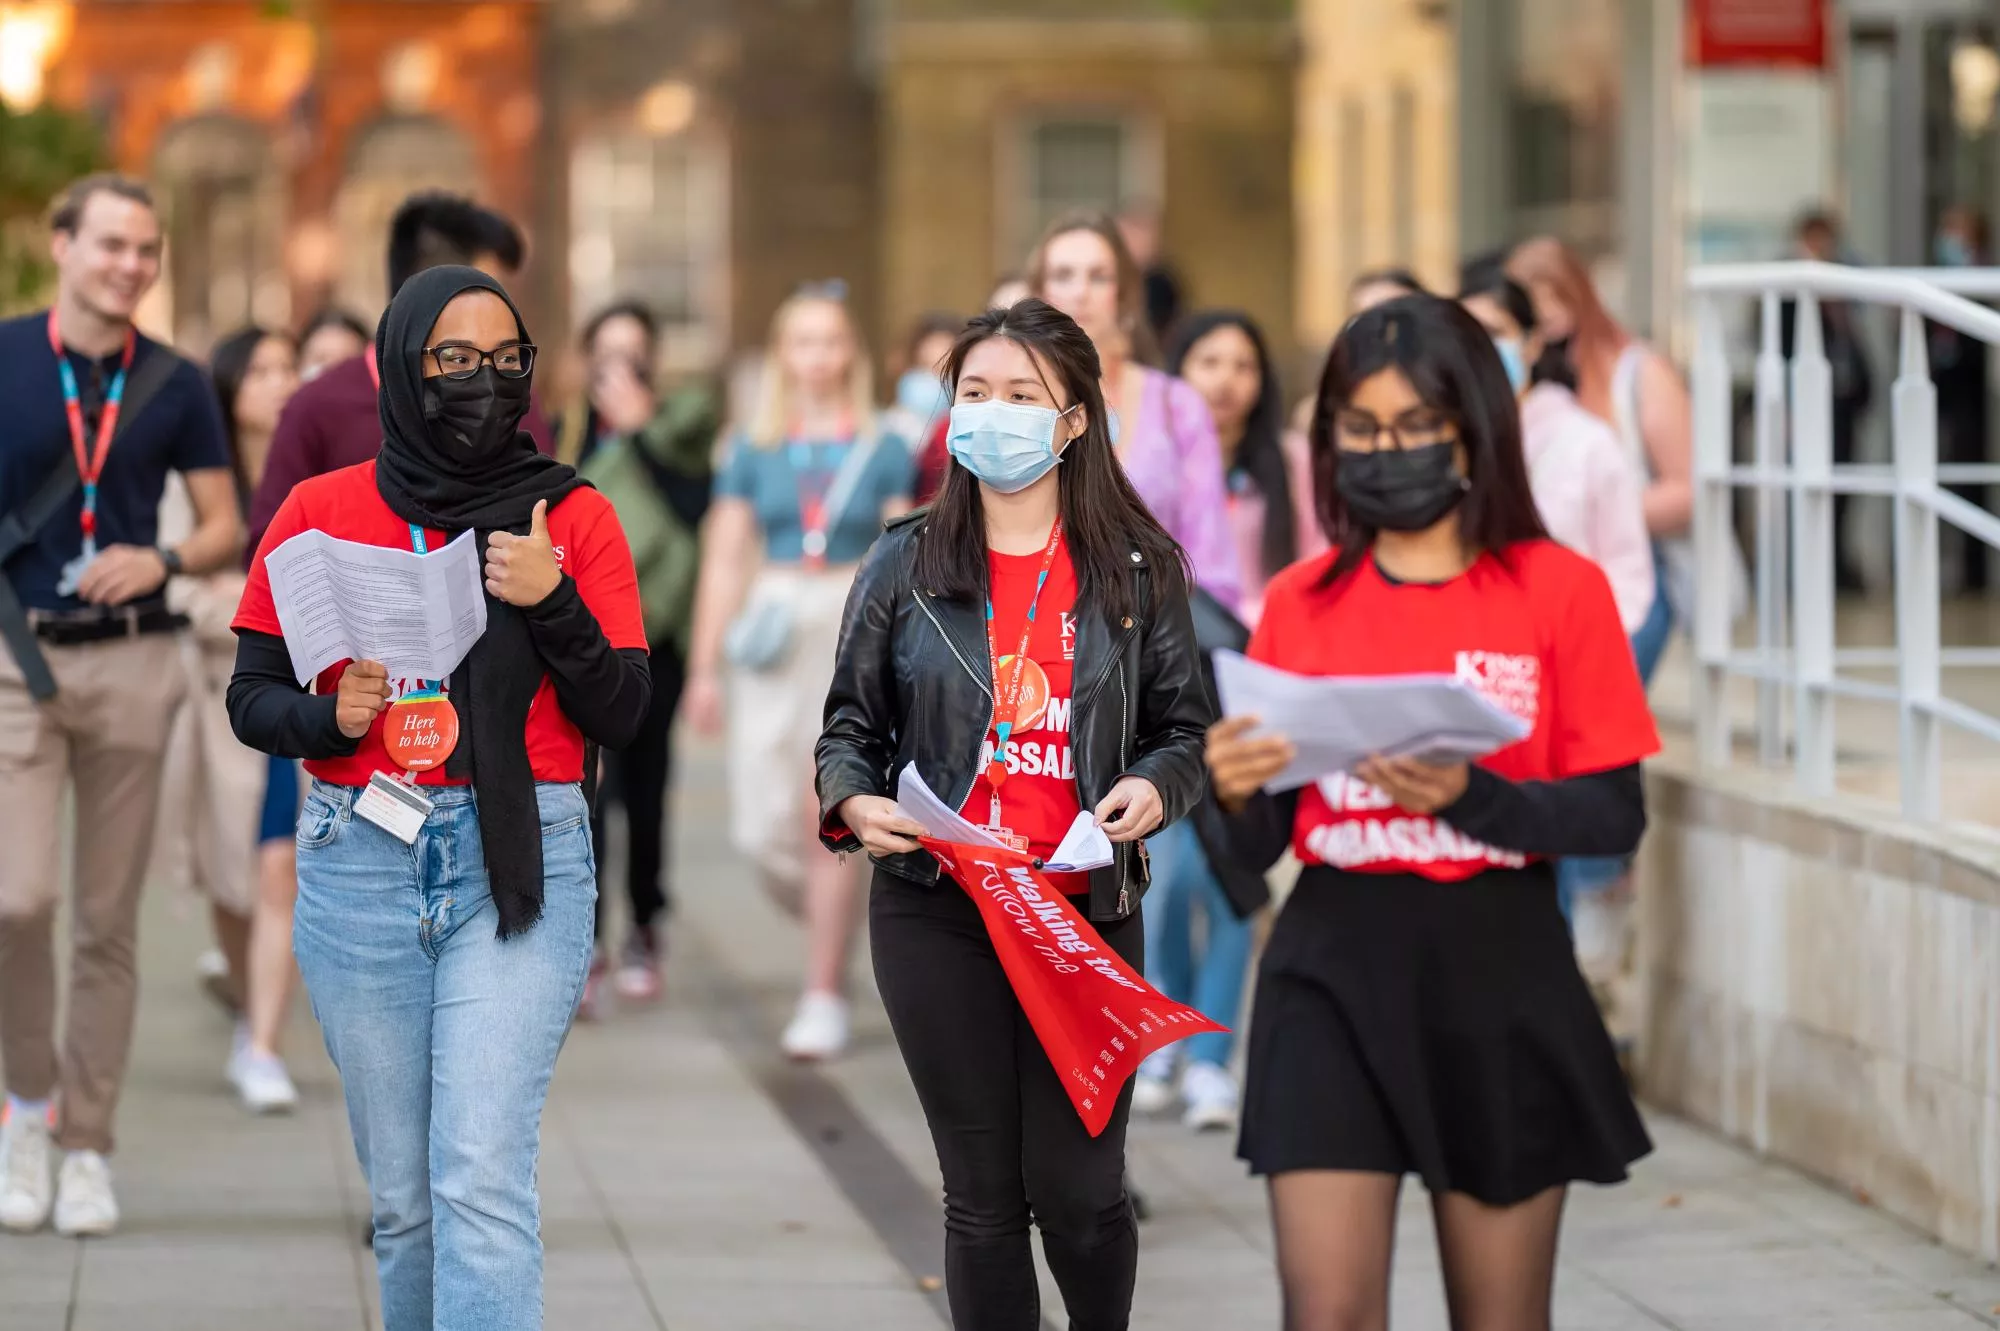 three student ambassadors wearing face coverings walk down the street